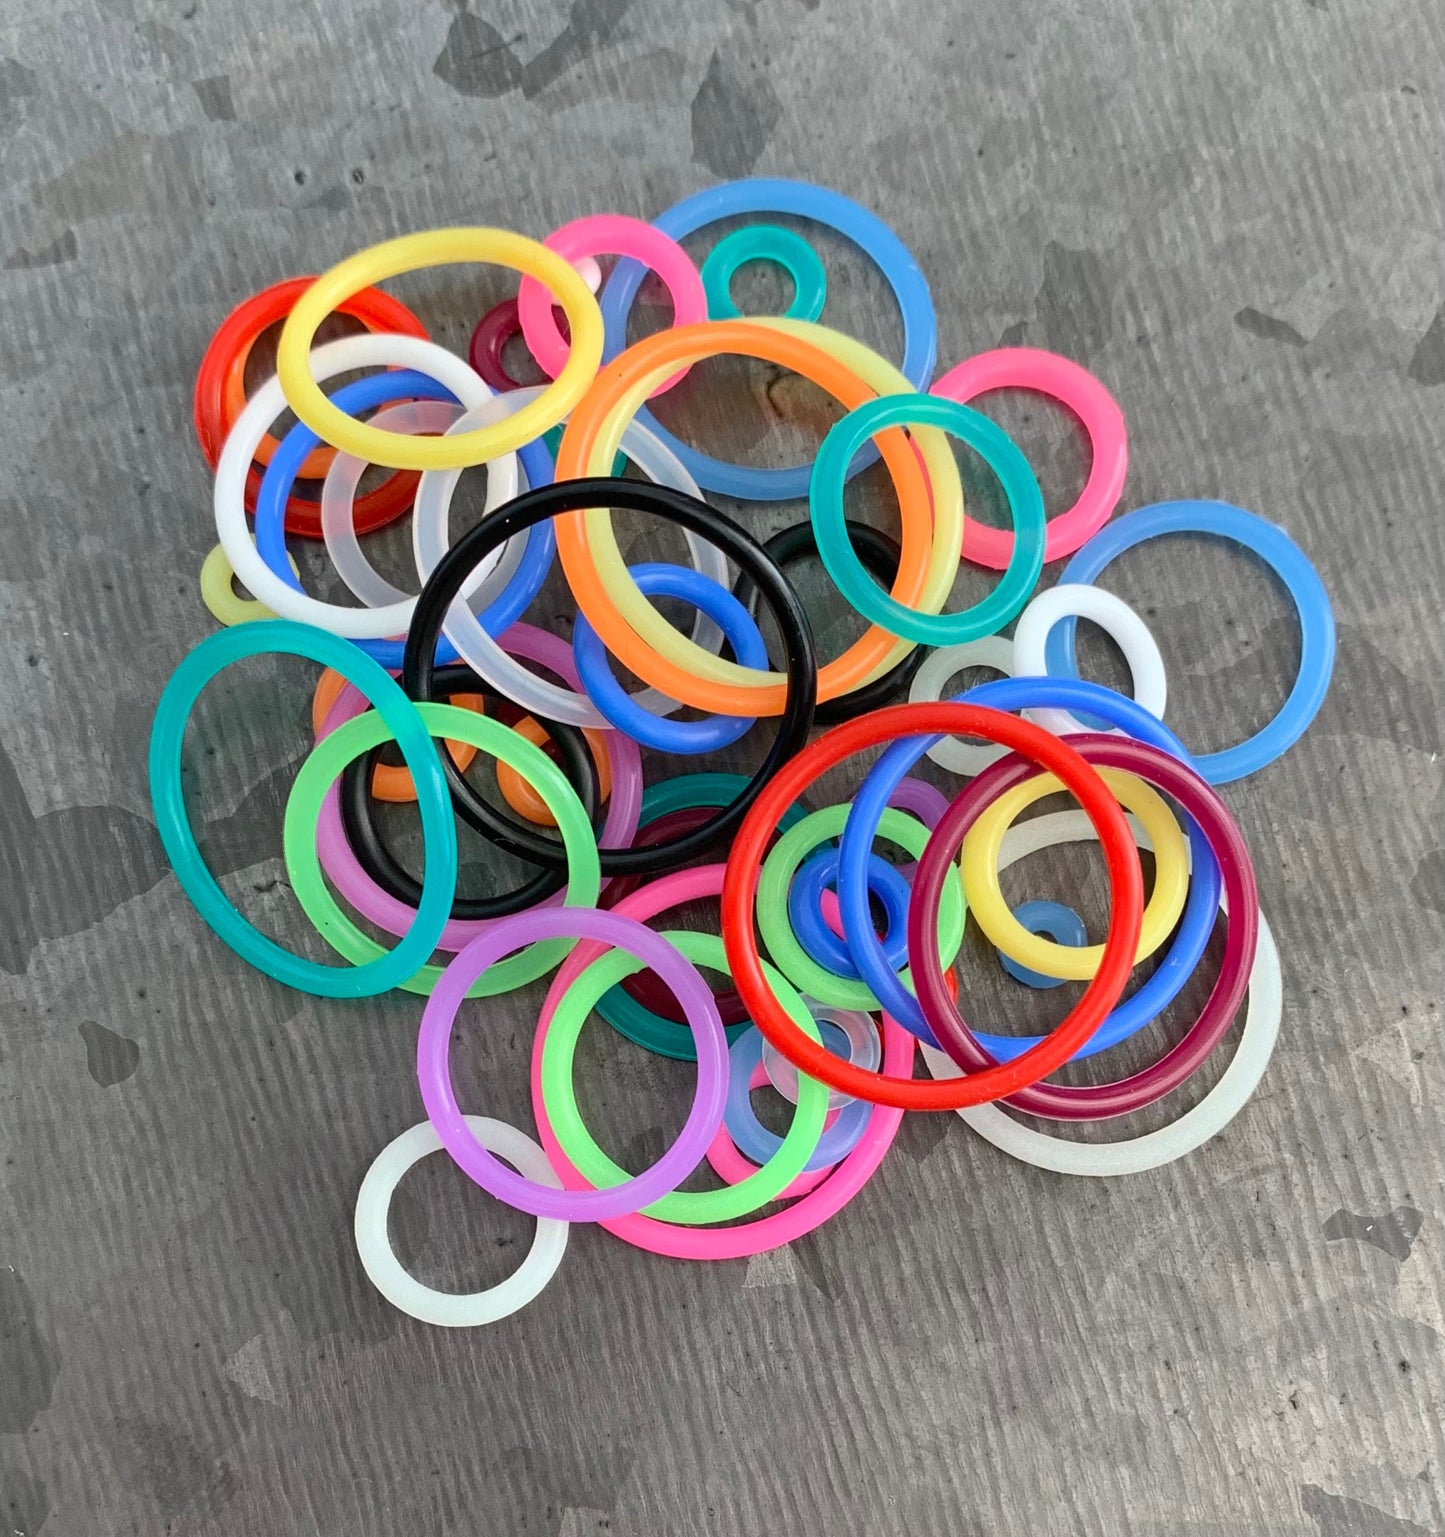 10 pack of Clear Replacement O-Rings Bands for Plugs or Tunnels - 13 more colors available!